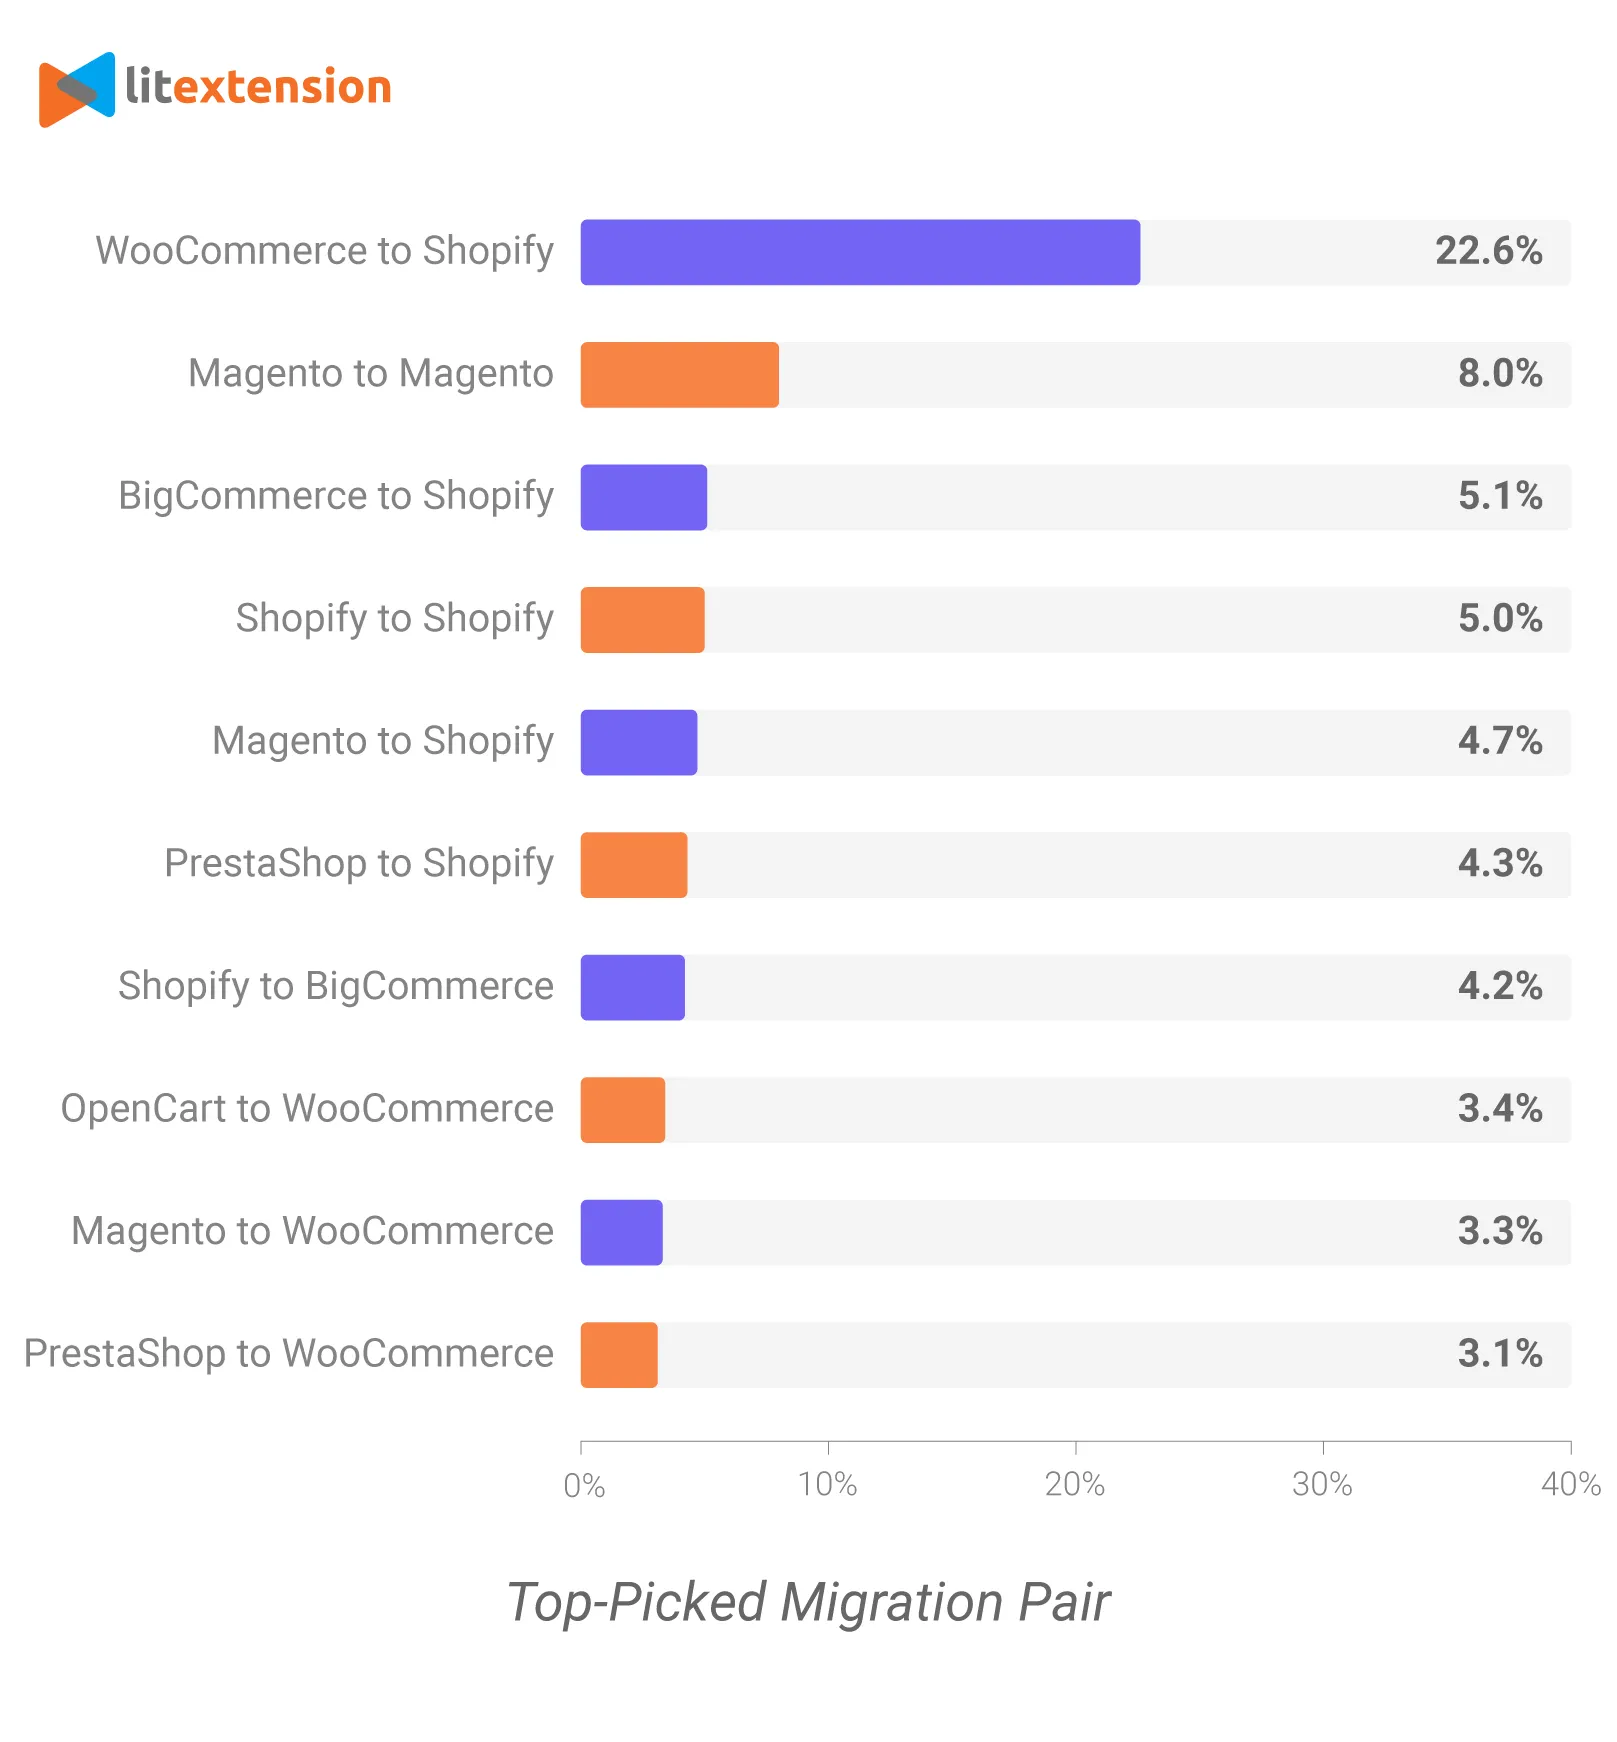 Top-picked migration pairs